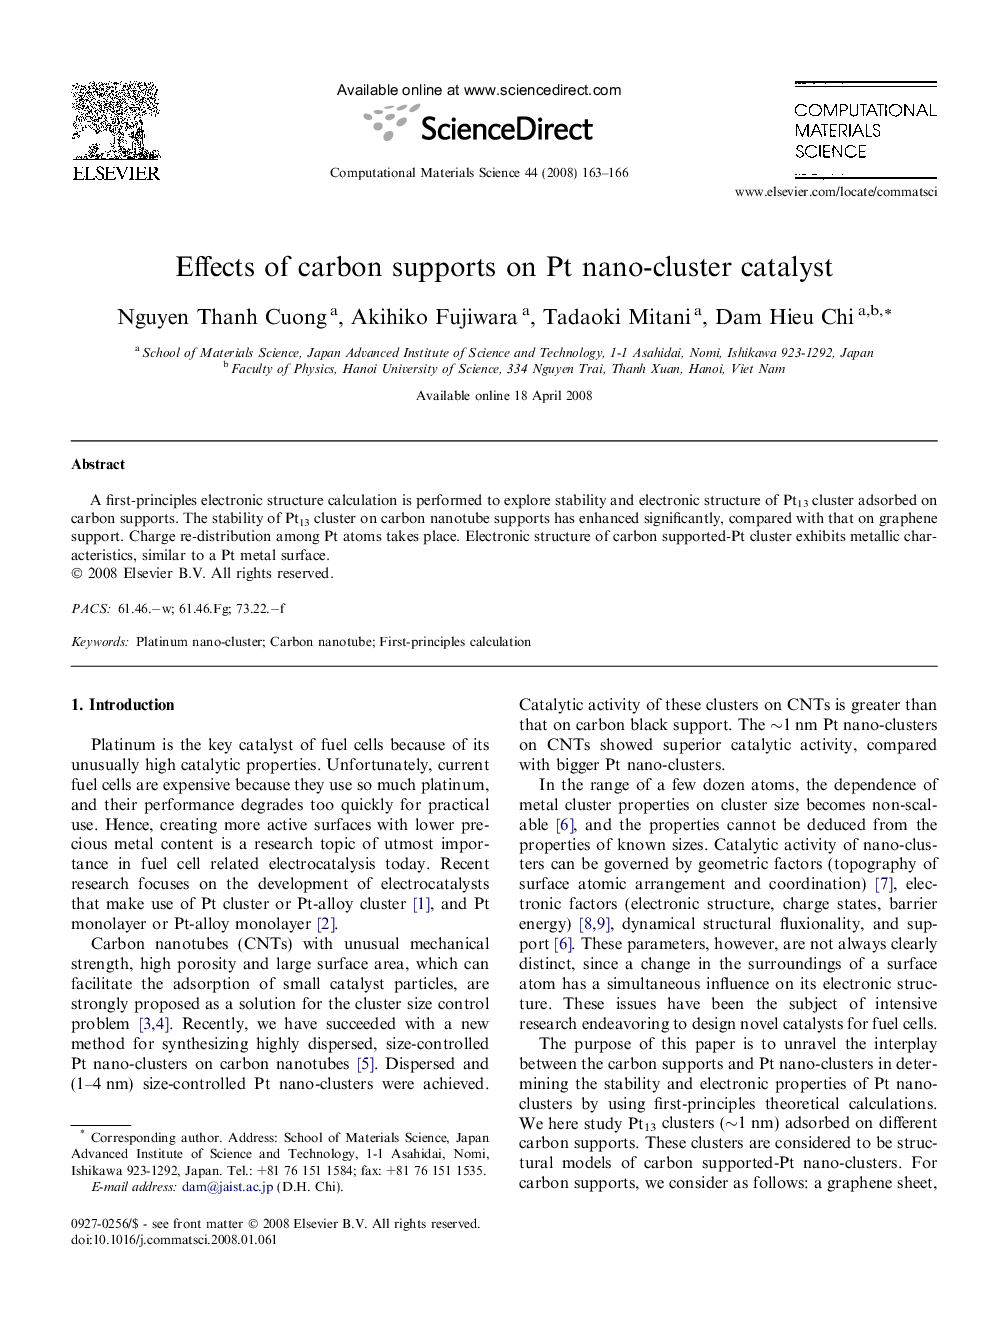 Effects of carbon supports on Pt nano-cluster catalyst